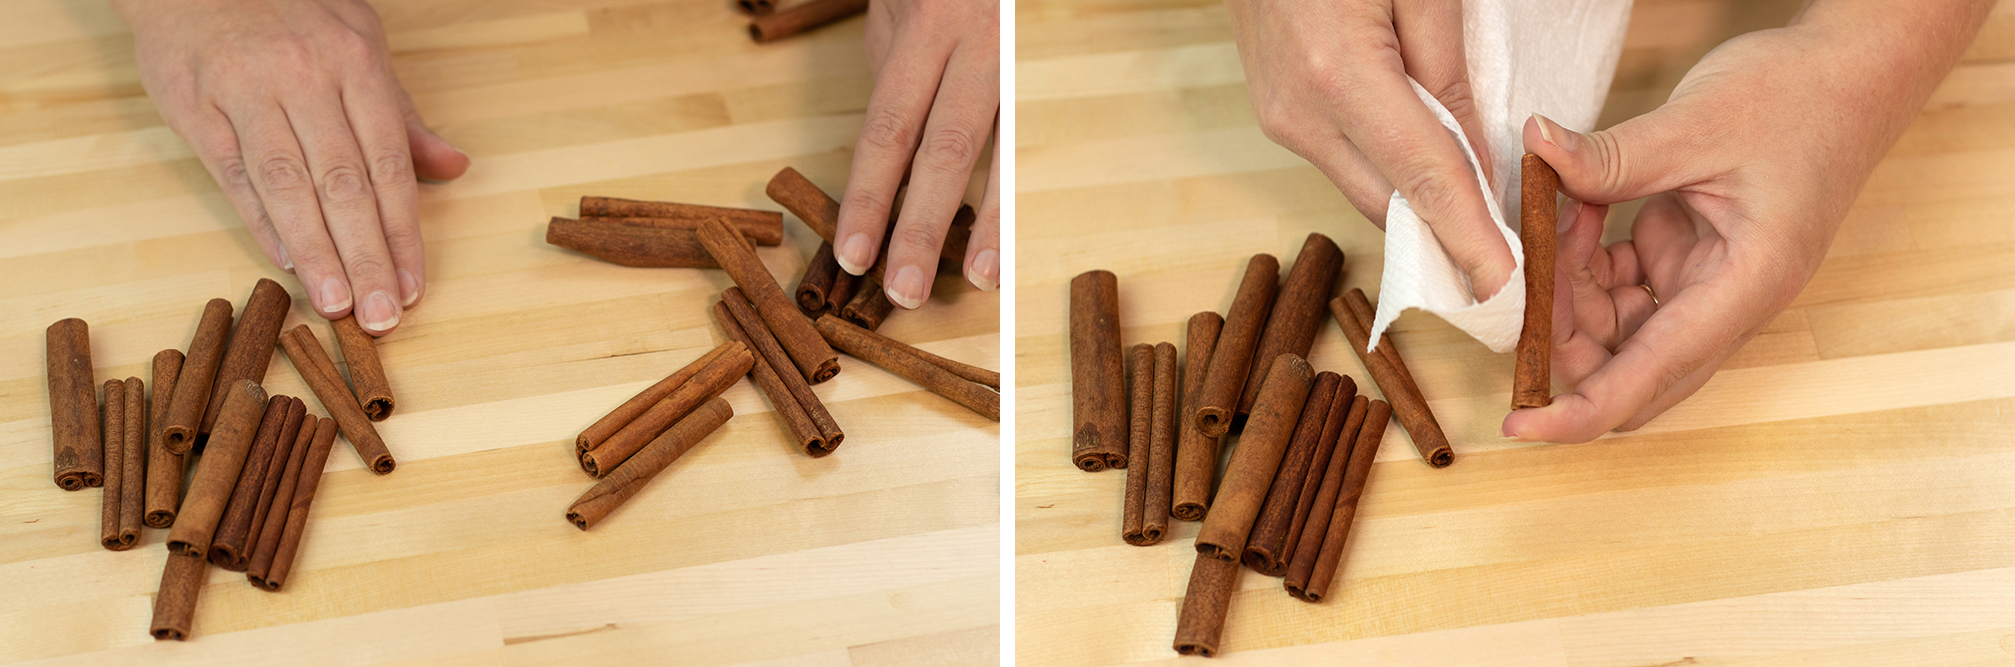 Prepping cinnamon sticks for creating a silicone mold.